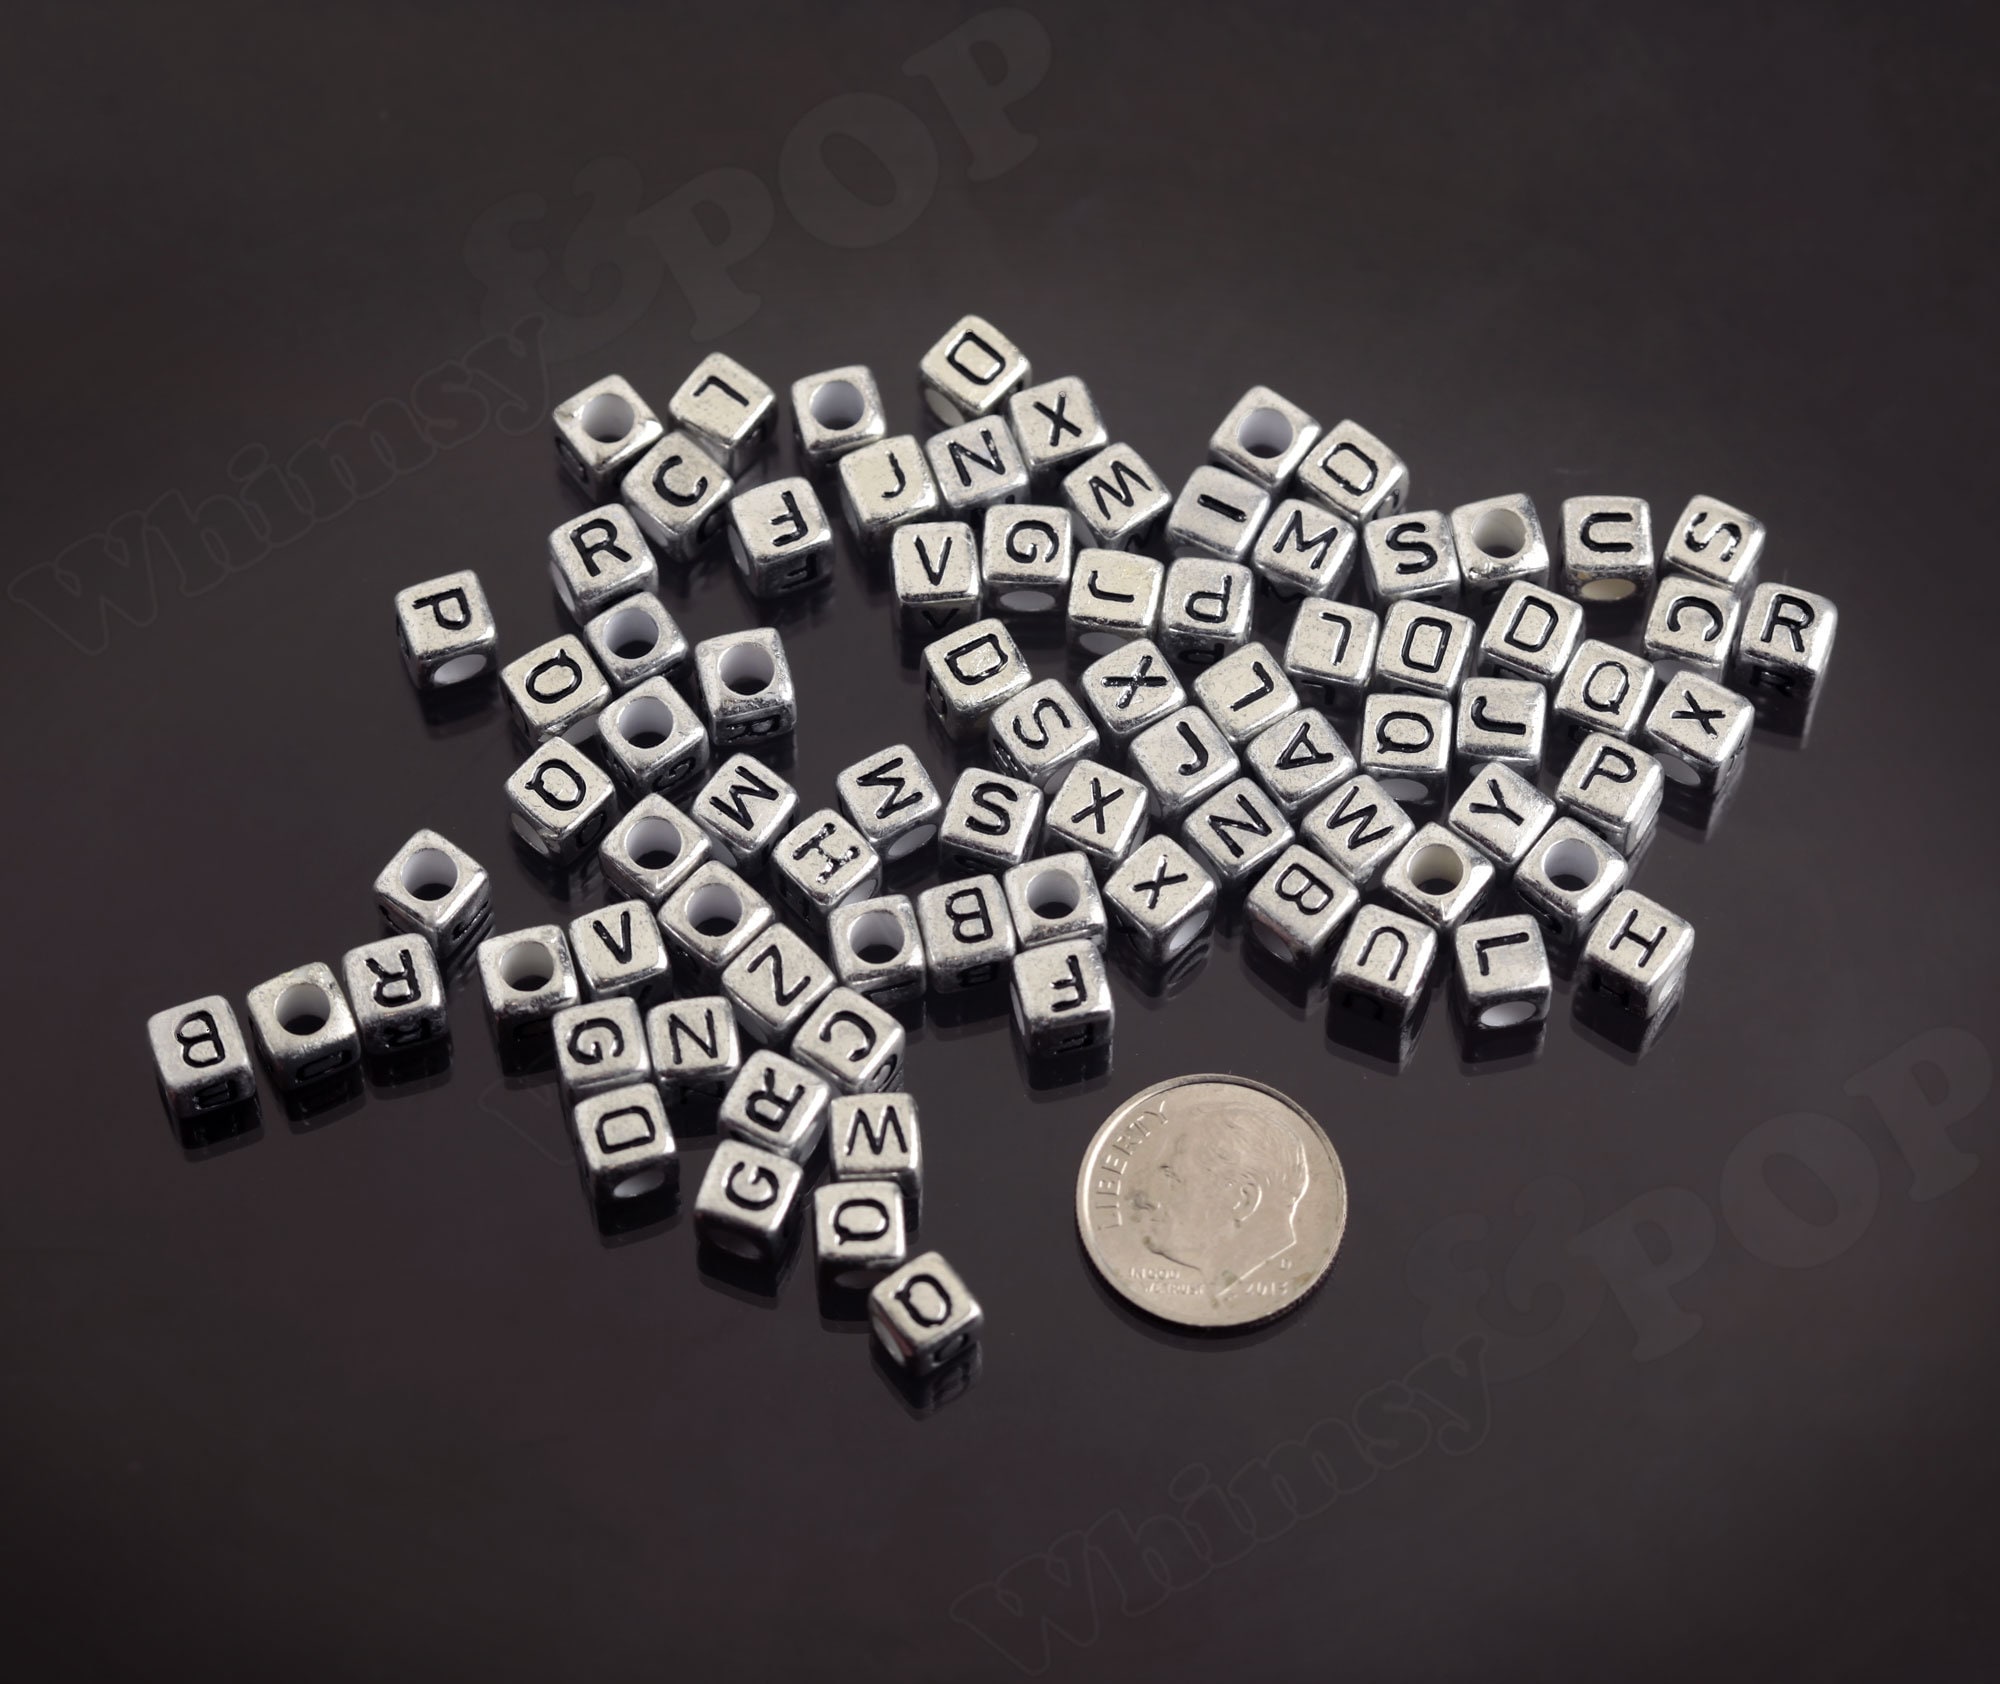  Decoendiy 26Pcs Silicone Alphabet Letter Beads 15mm, Black  White Letter Print Beads, Square A-Z Beads, Geometric Shaped Beads, Loose  Spacer Beads for Adults DIY Crafts Supplies : Arts, Crafts & Sewing